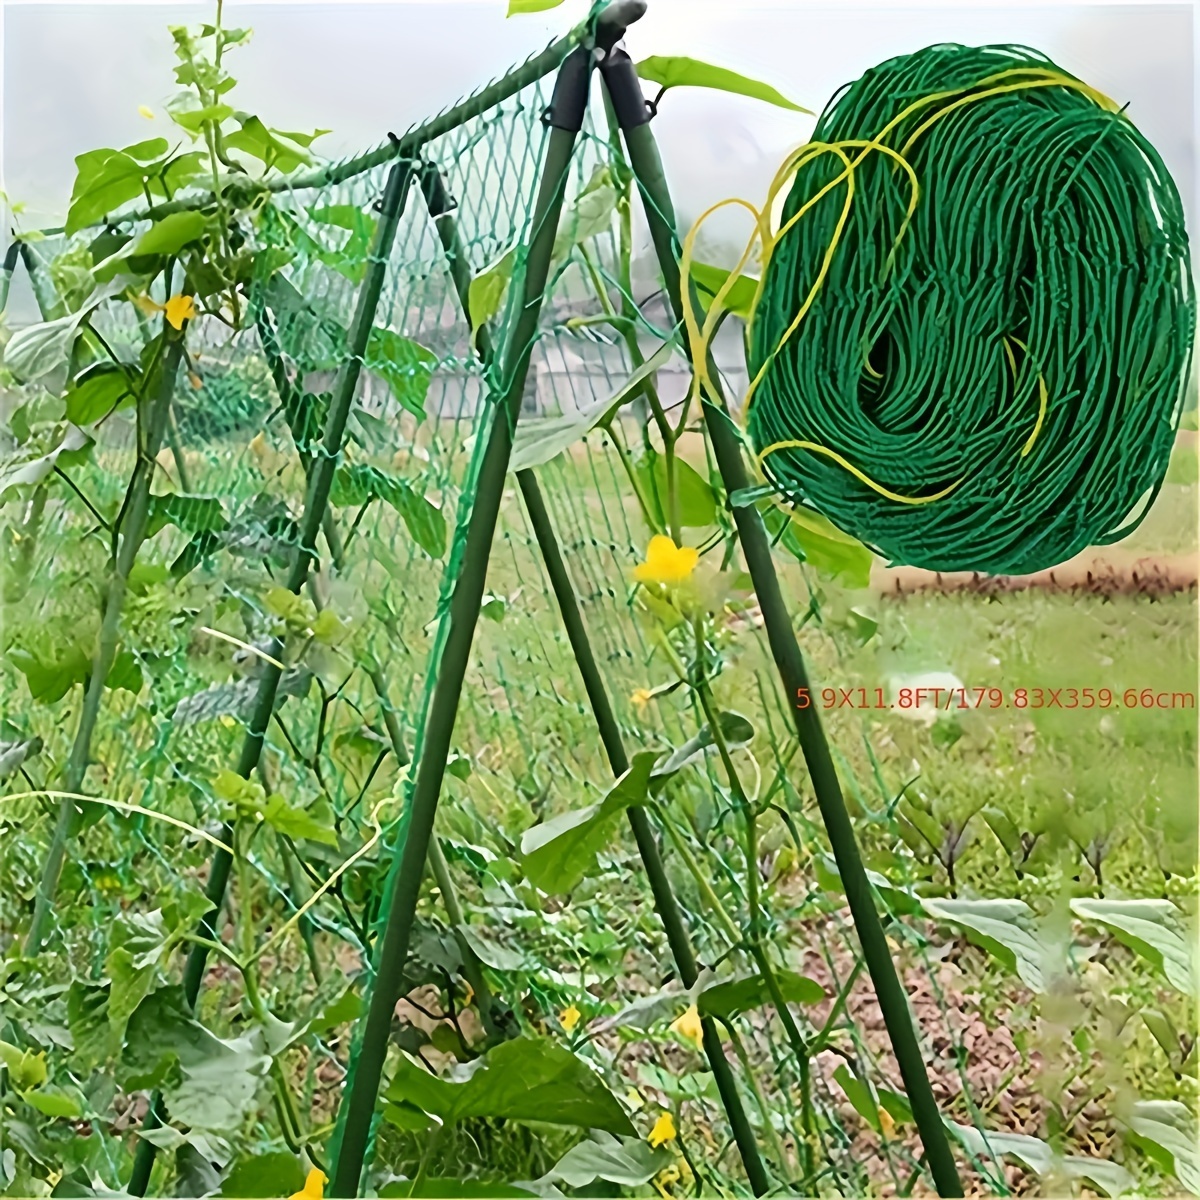 

1 Pack, Heavy-duty Garden Duty Garden Trellis Netting Robust Support For Climbing Vegetables, Cucumbers, Tomatoes, And Vines For Garden Outdoor Yard Plants Supplies